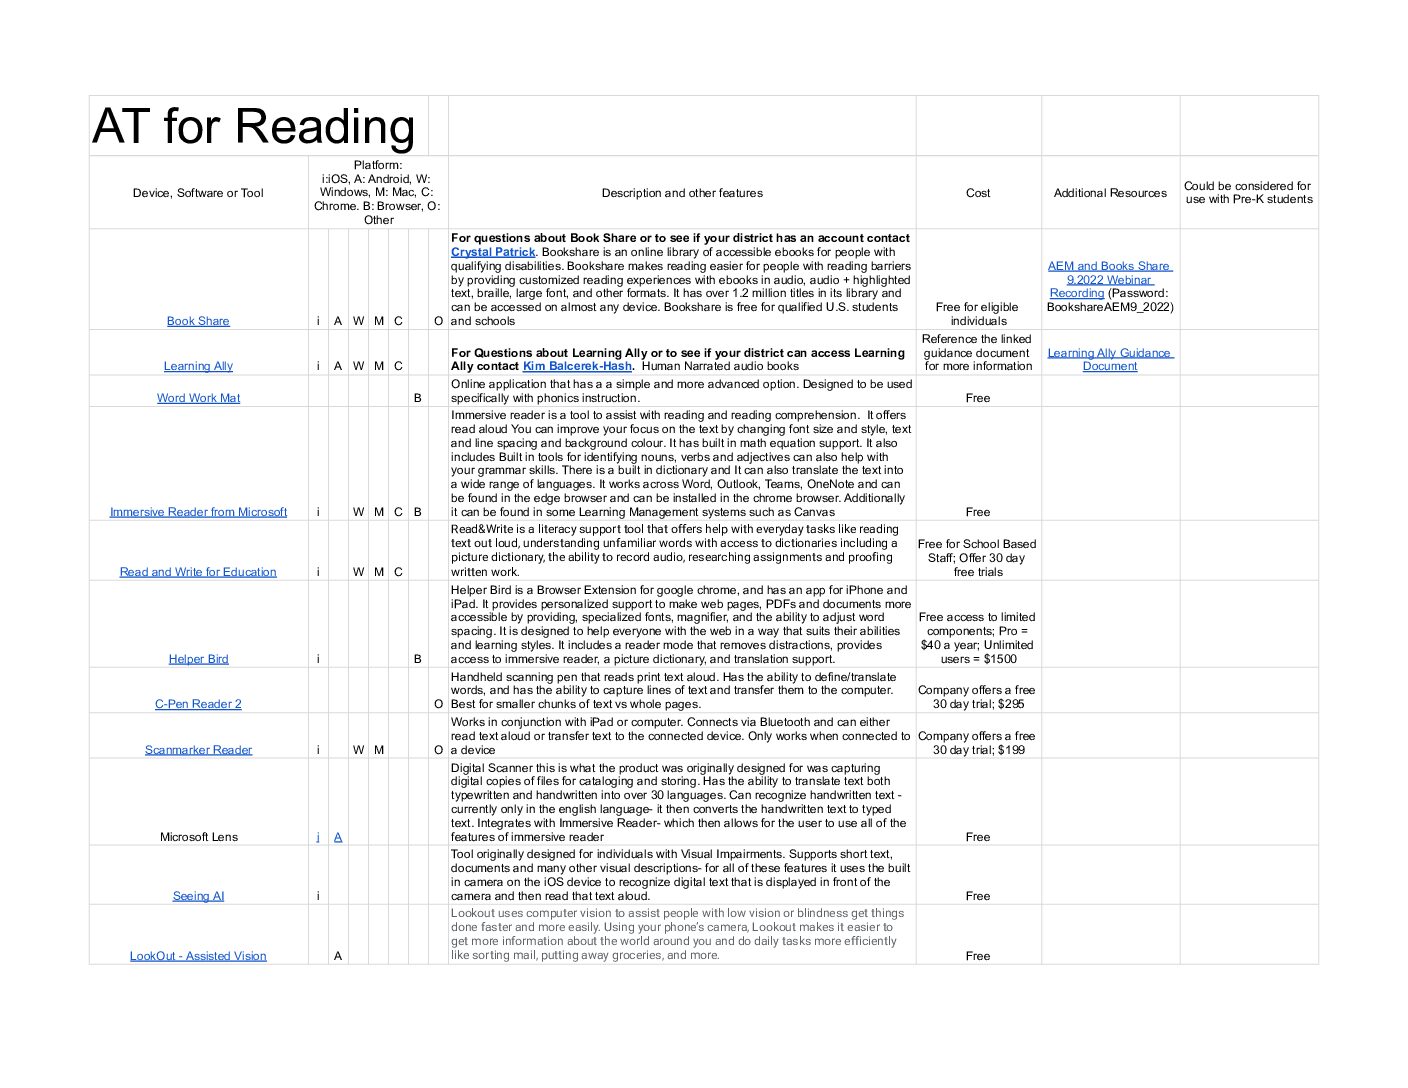 Assistive Technology Tools for Consideration - AT for Reading